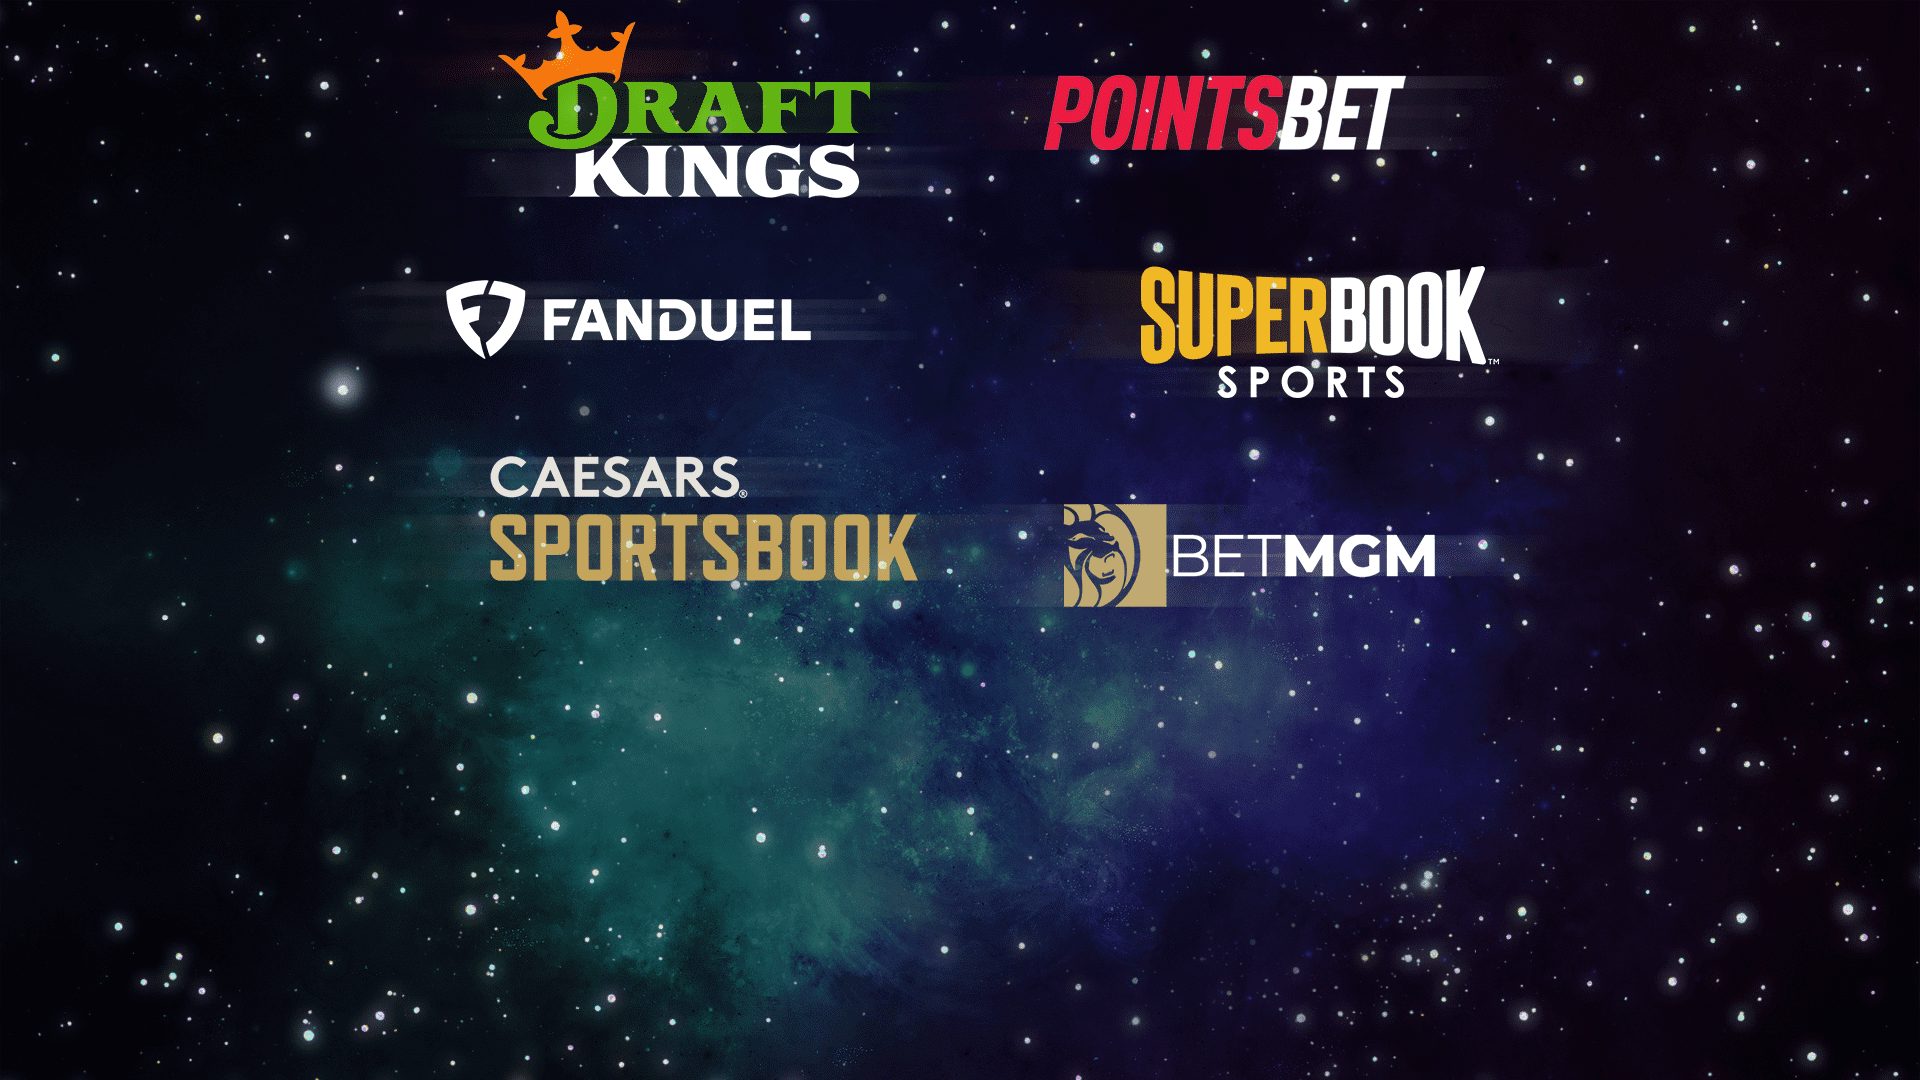 Top sports betting apps, promotions & bonuses for February 2023